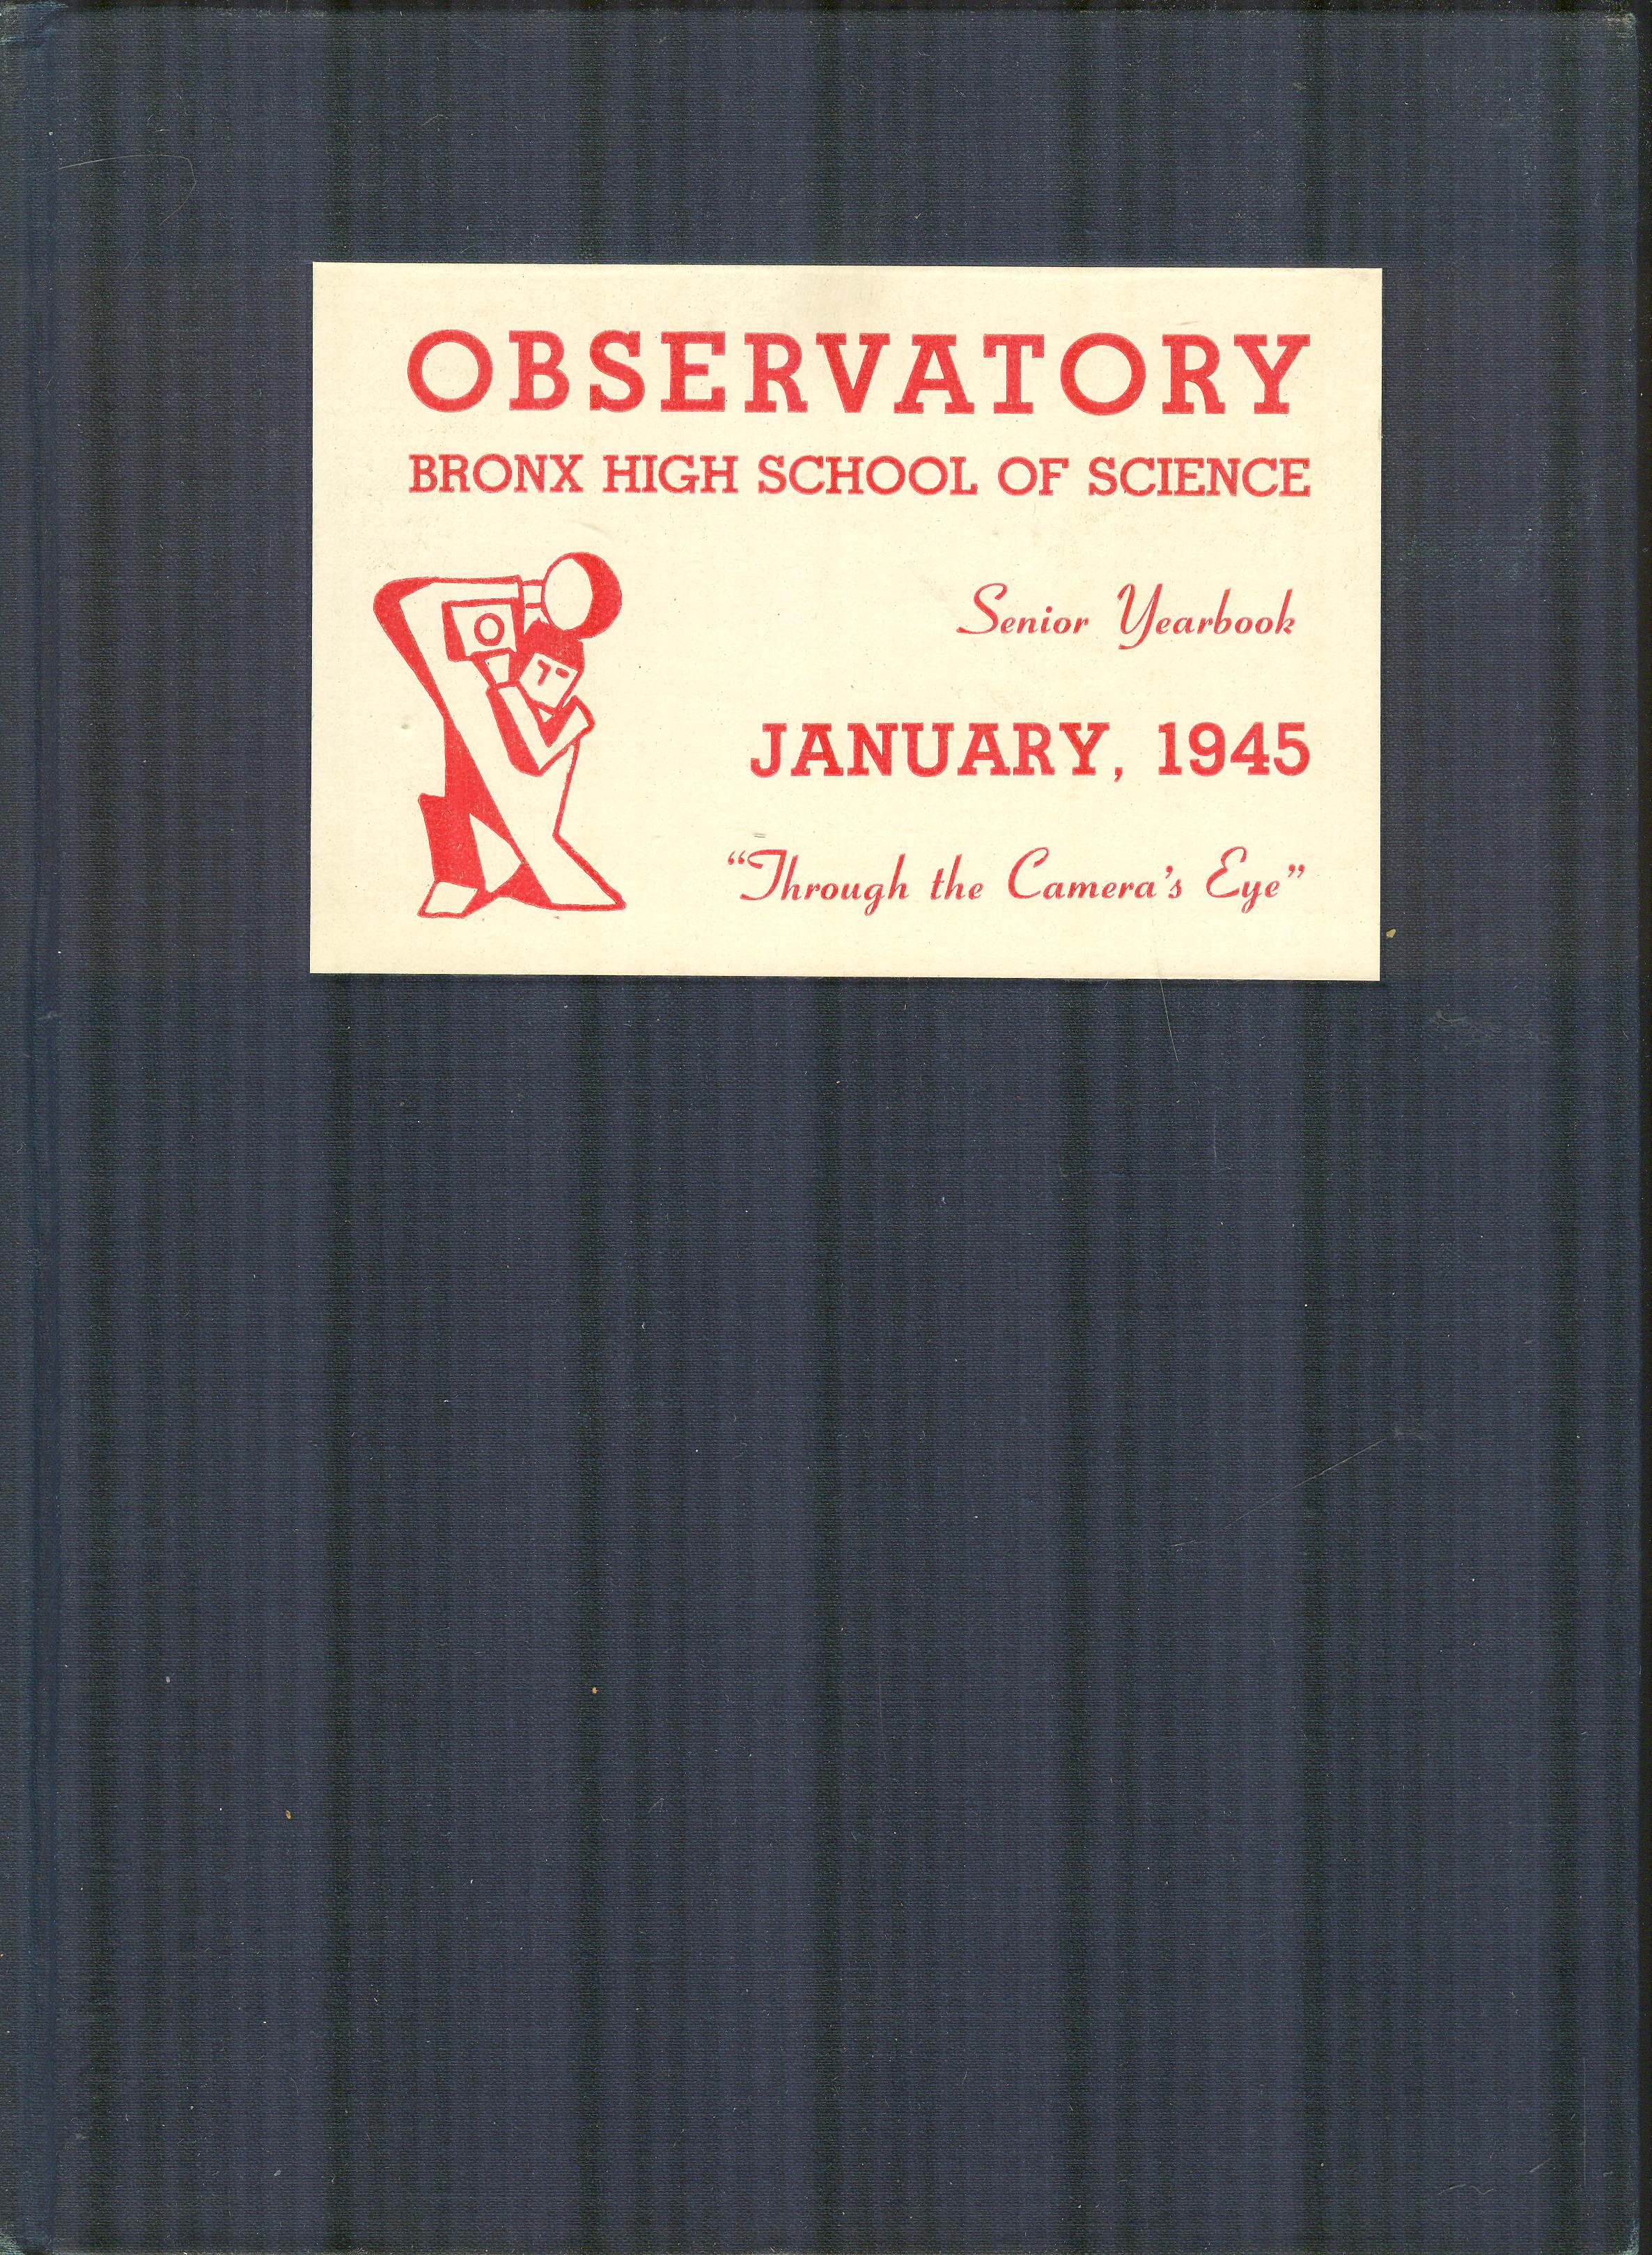 Image for Observatory Bronx High School of Science Senior Yearbook January 1945, Through the Camera's Eye.